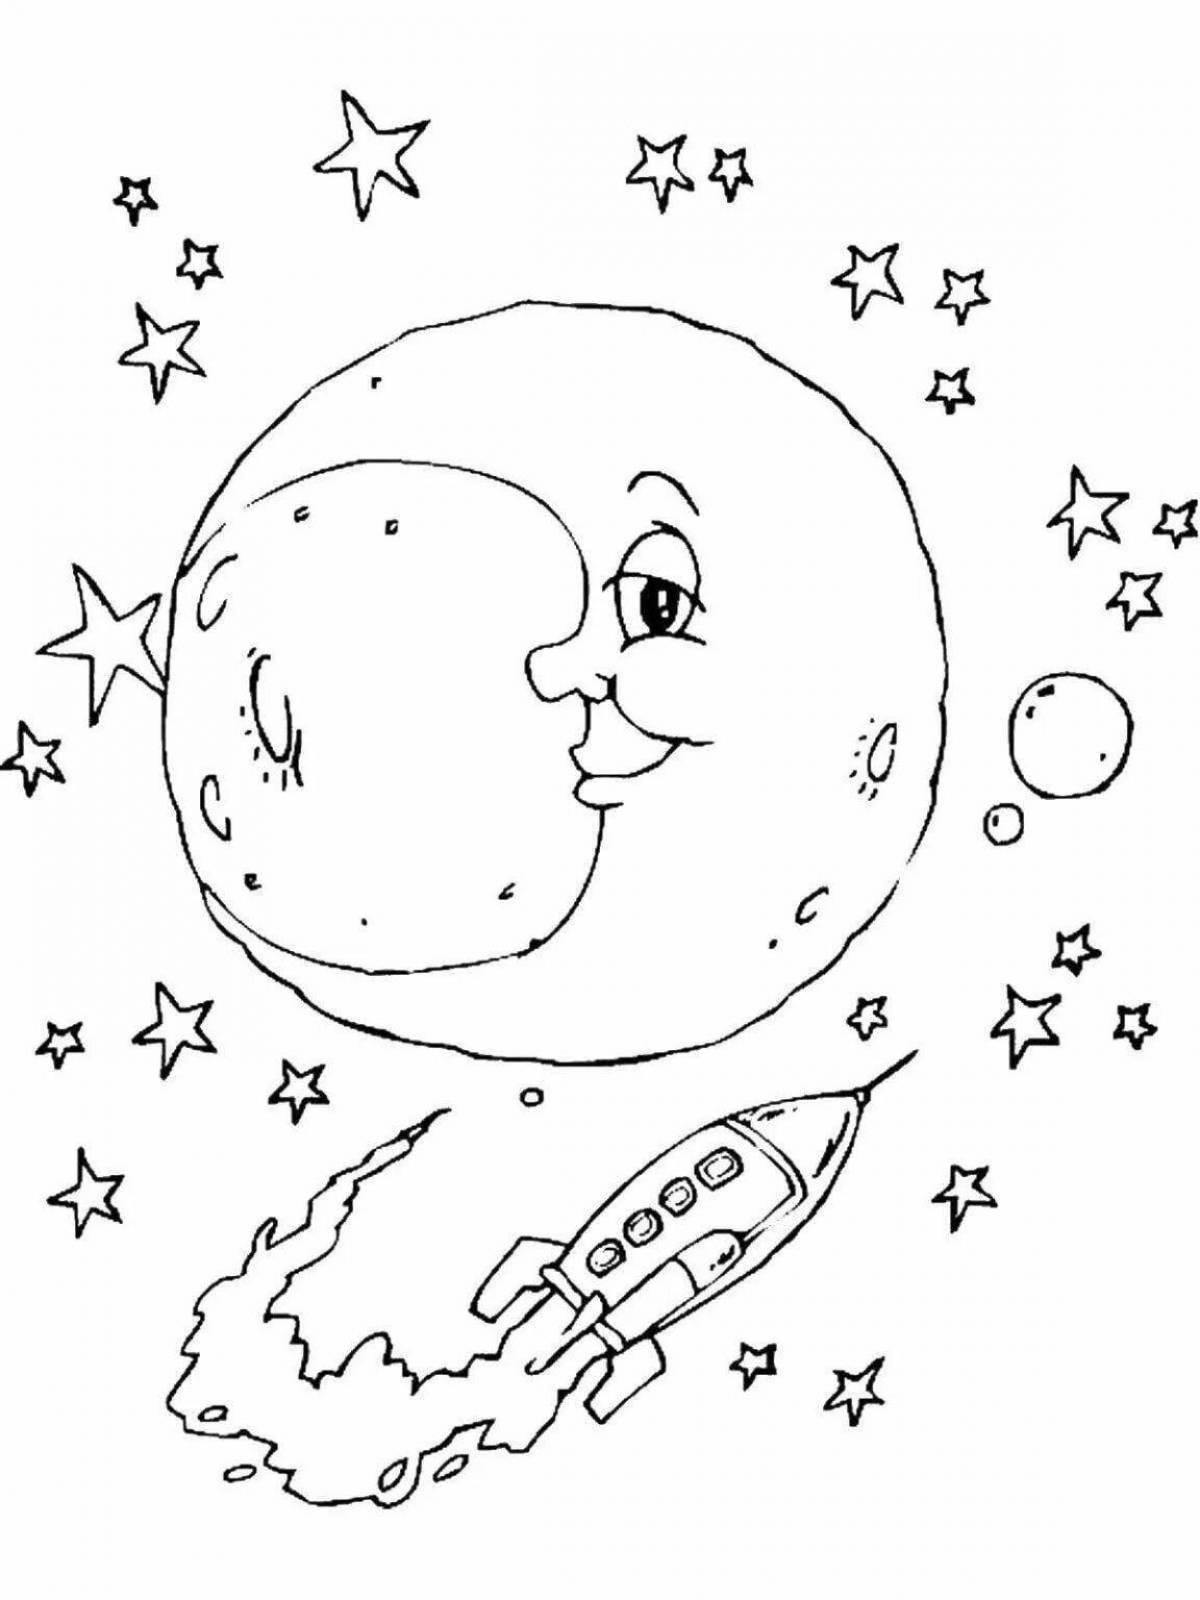 Gorgeous Universe coloring page